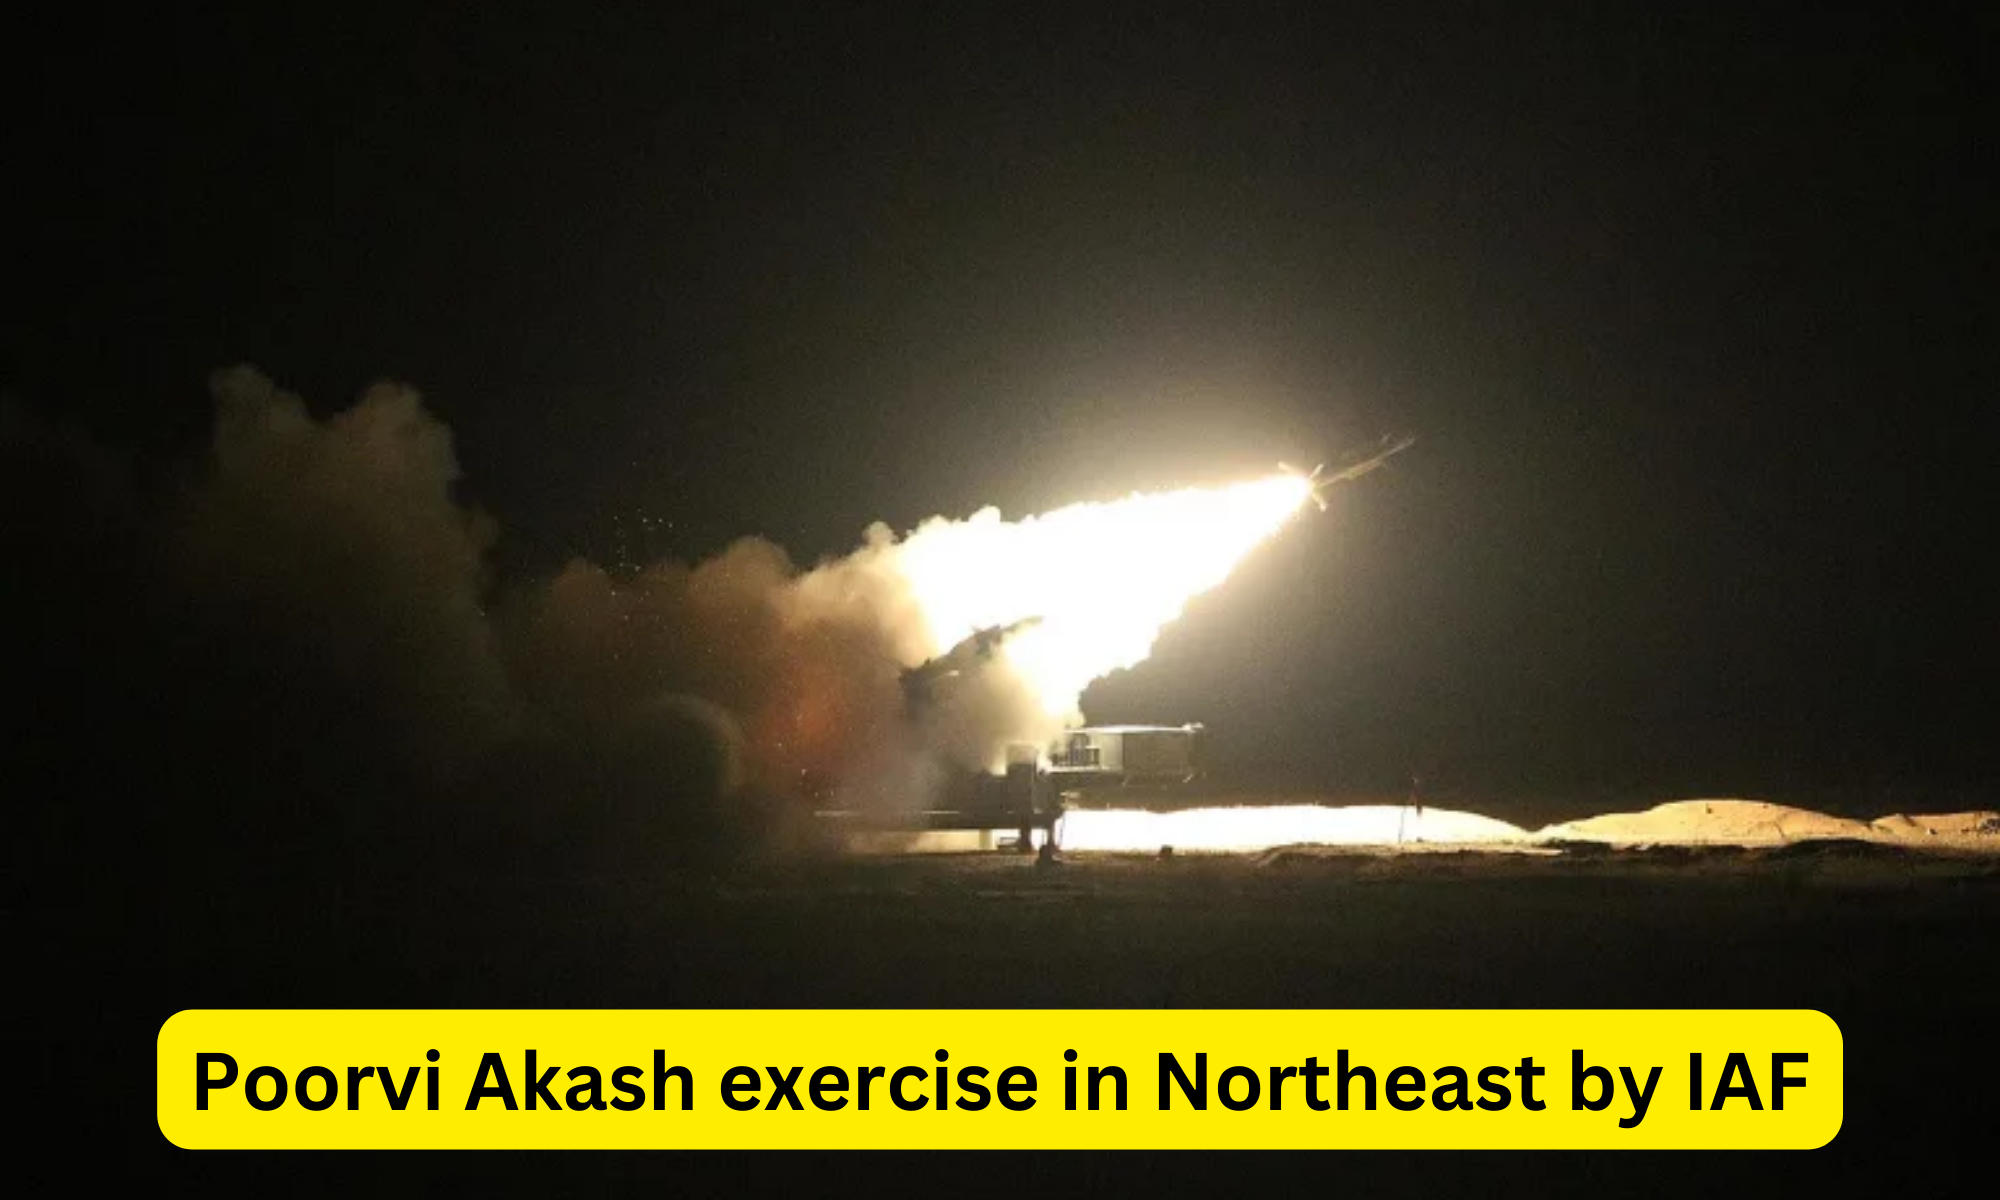 Poorvi Akash exercise in Northeast by IAF